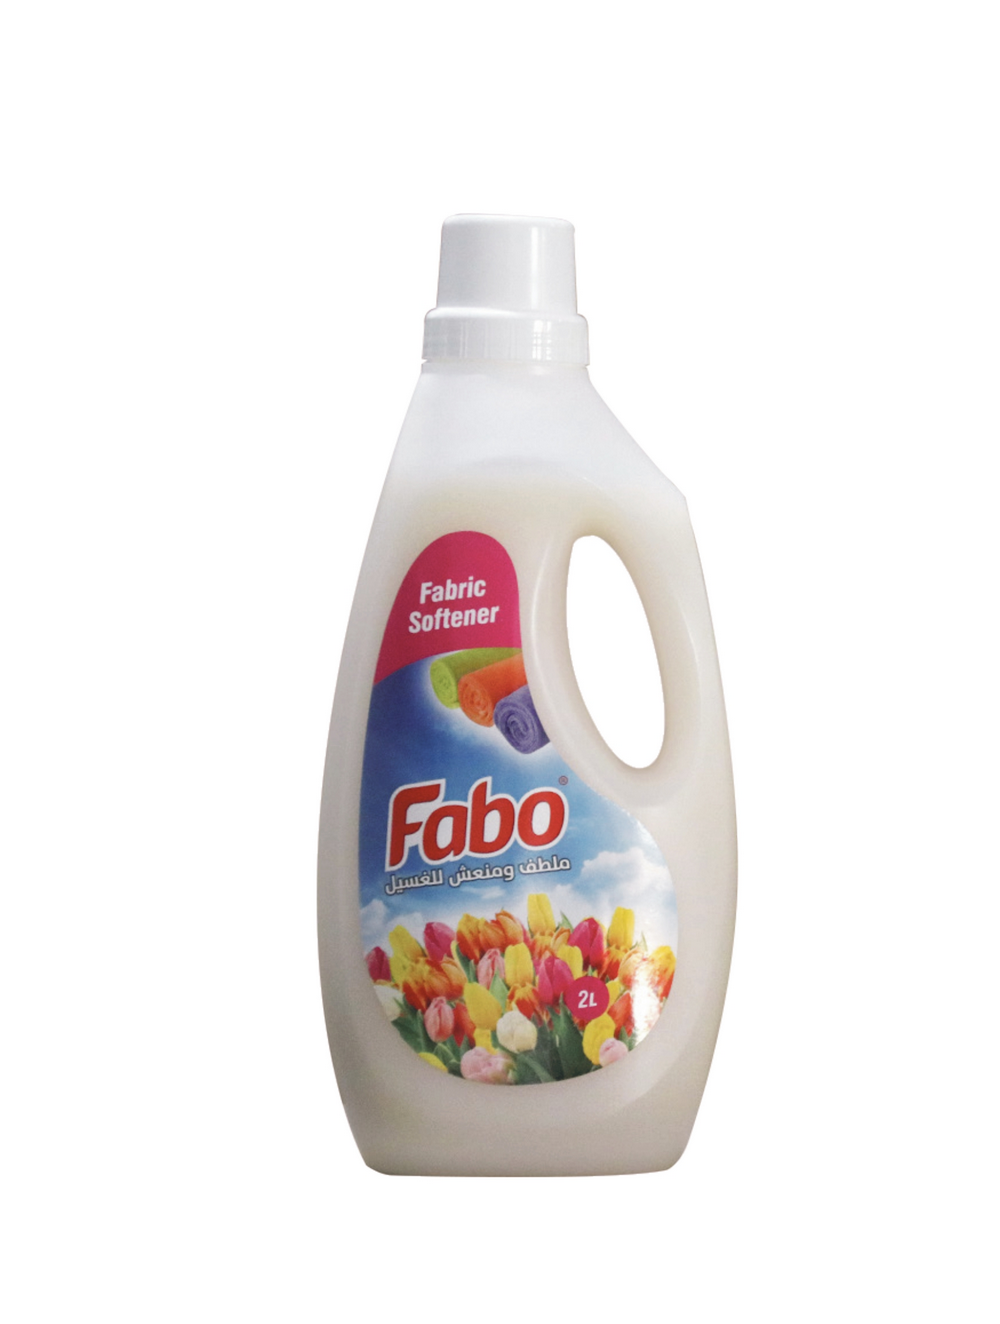 fabo-products_page-0122